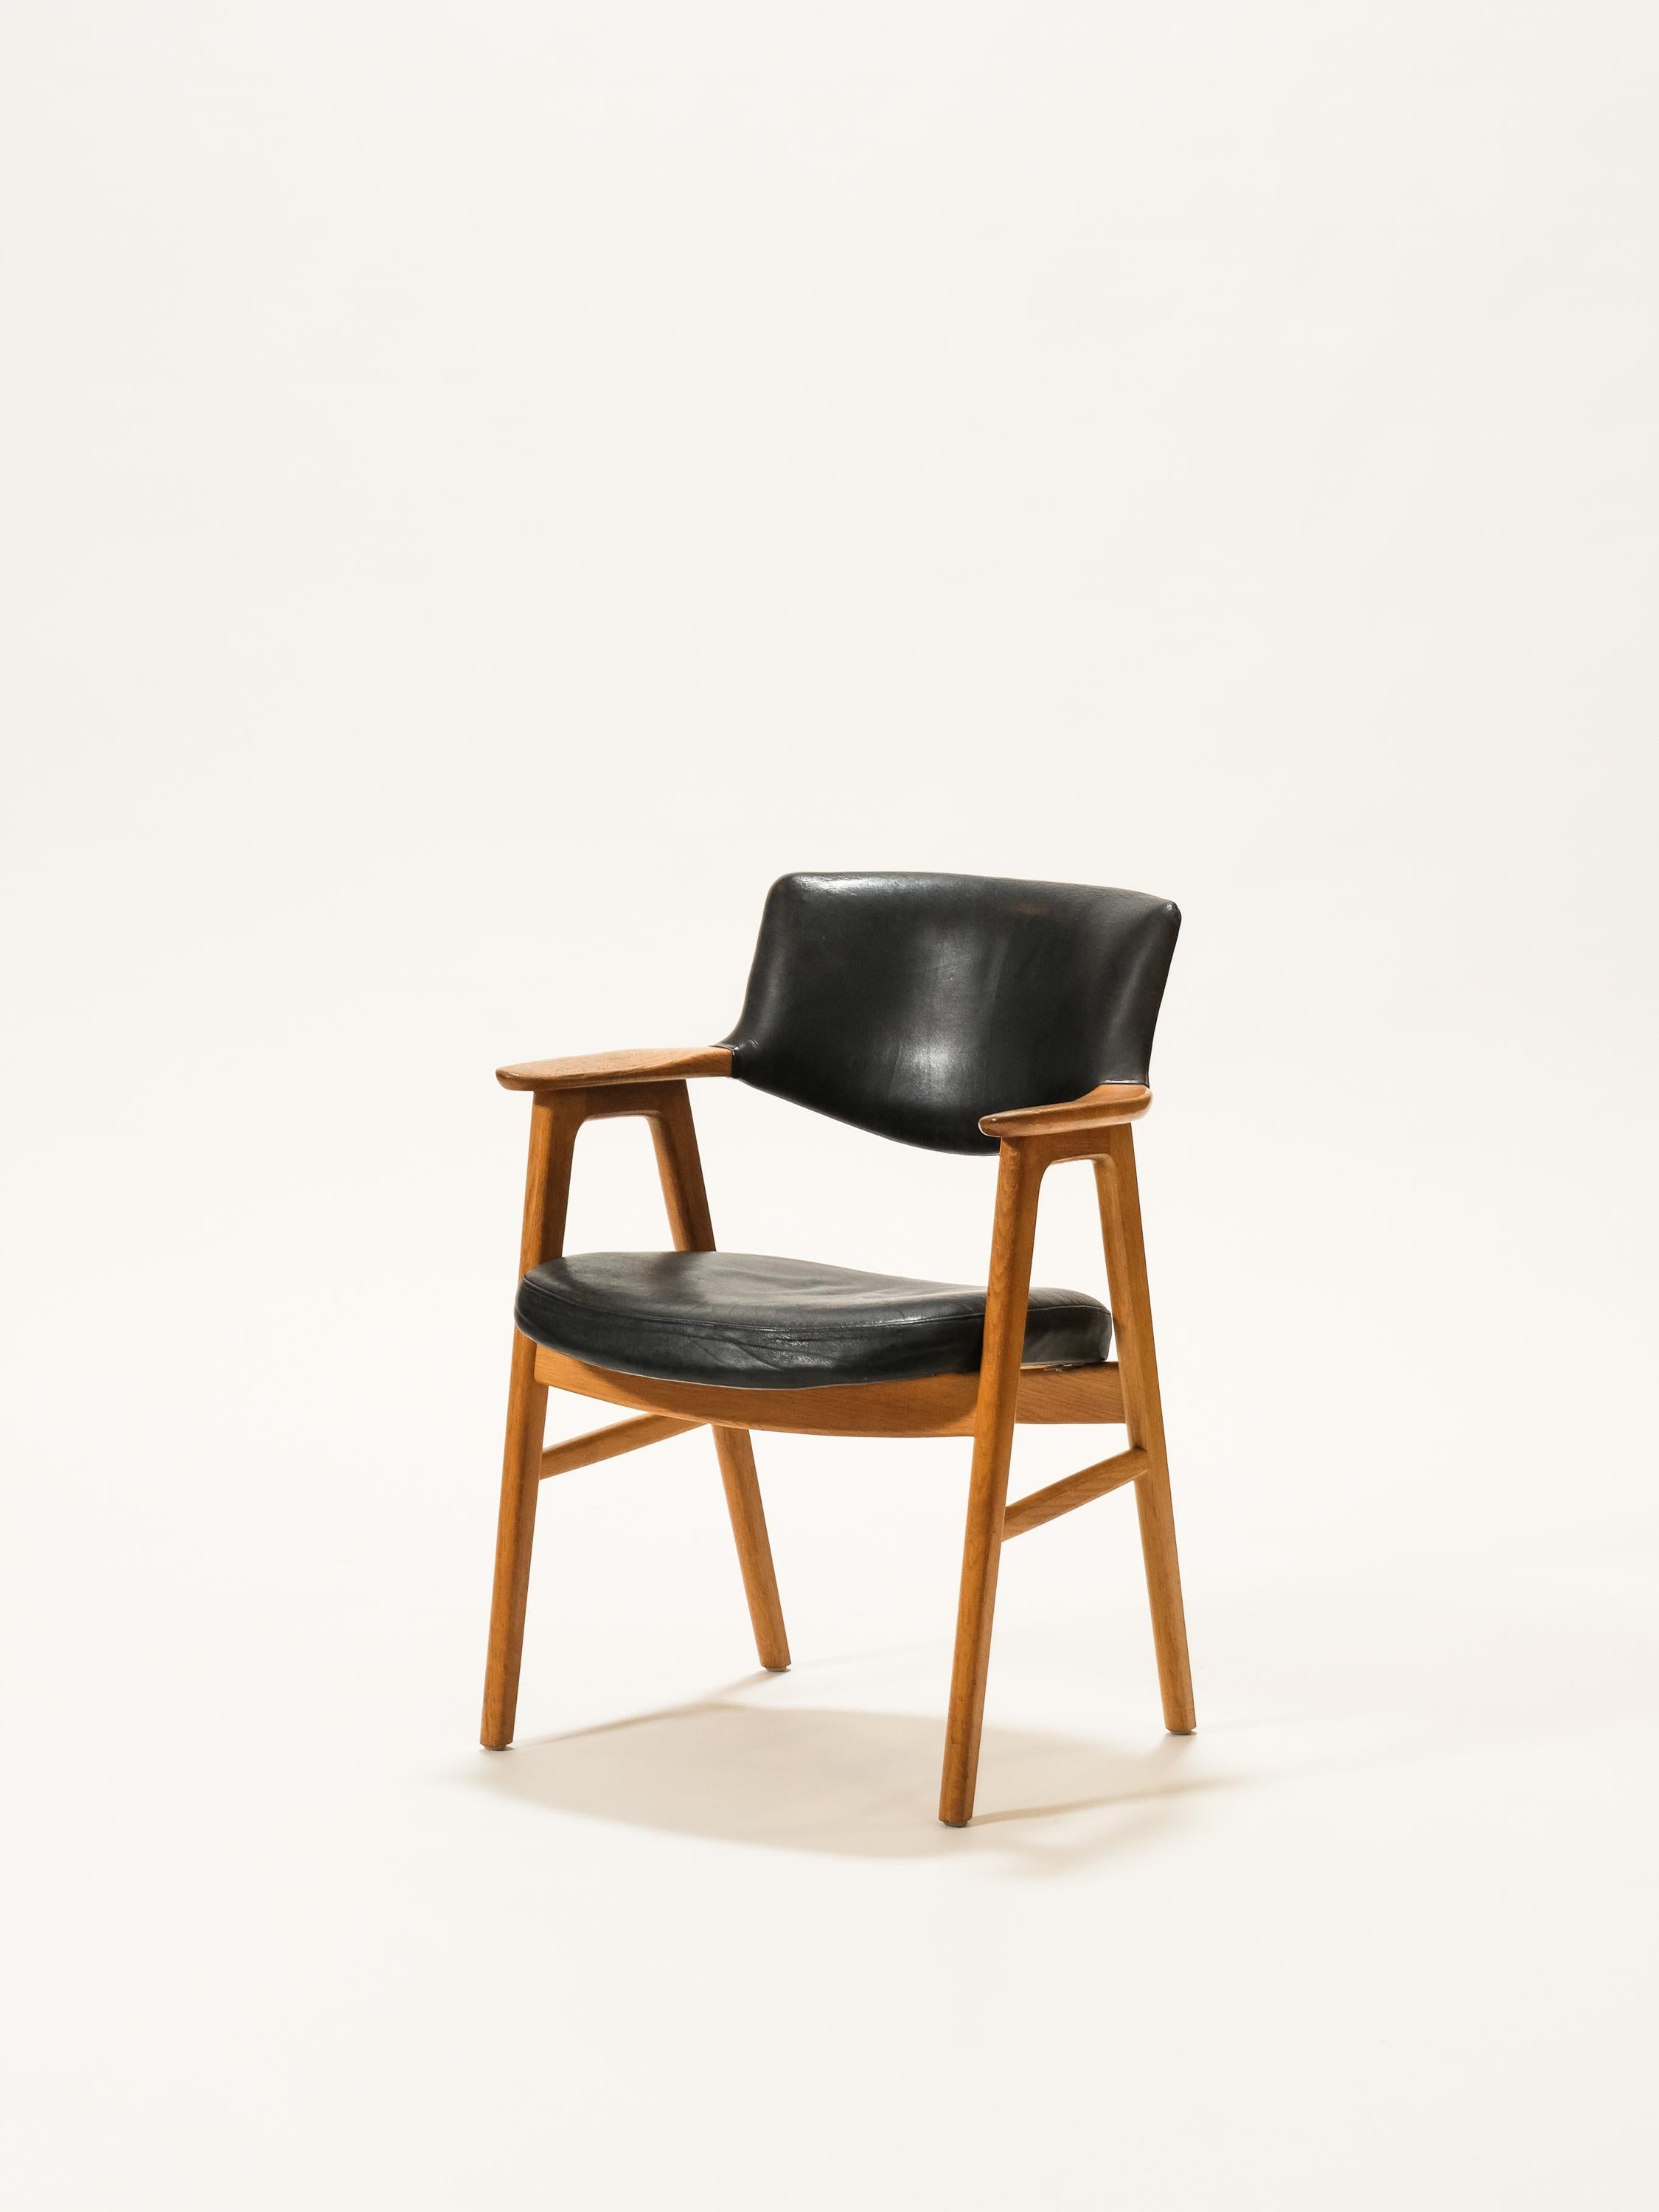 Danish oak and leather armchair by Erik Kirkegaard. Black leather with patinated oak frame.